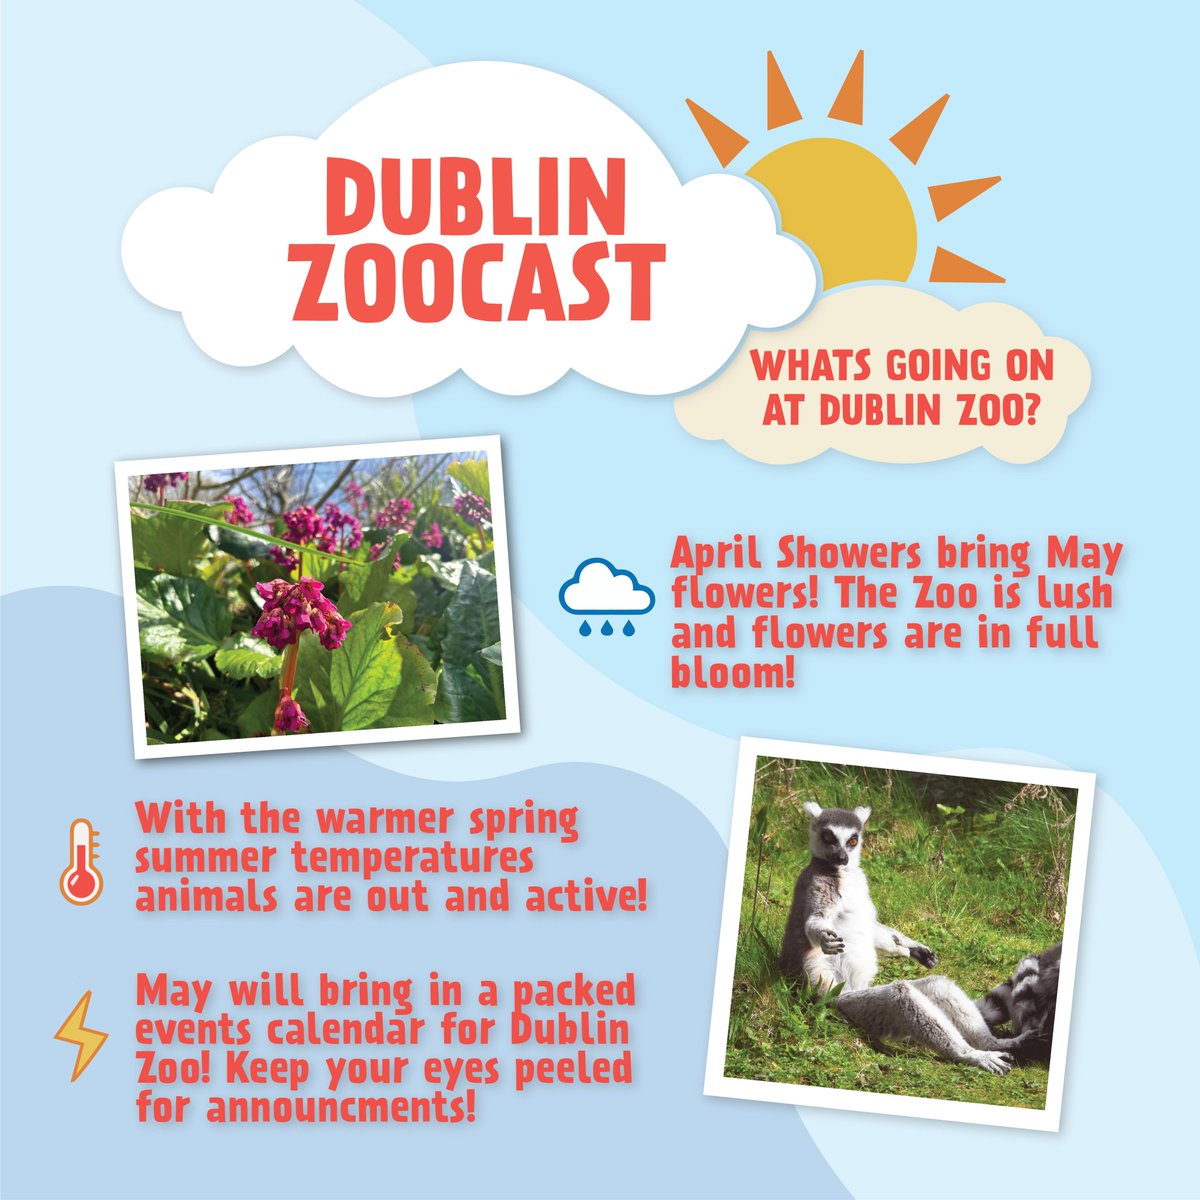 THIS JUST IN: Dublin Zoo is a MUST VISIT as temps begin to rise! ☀️